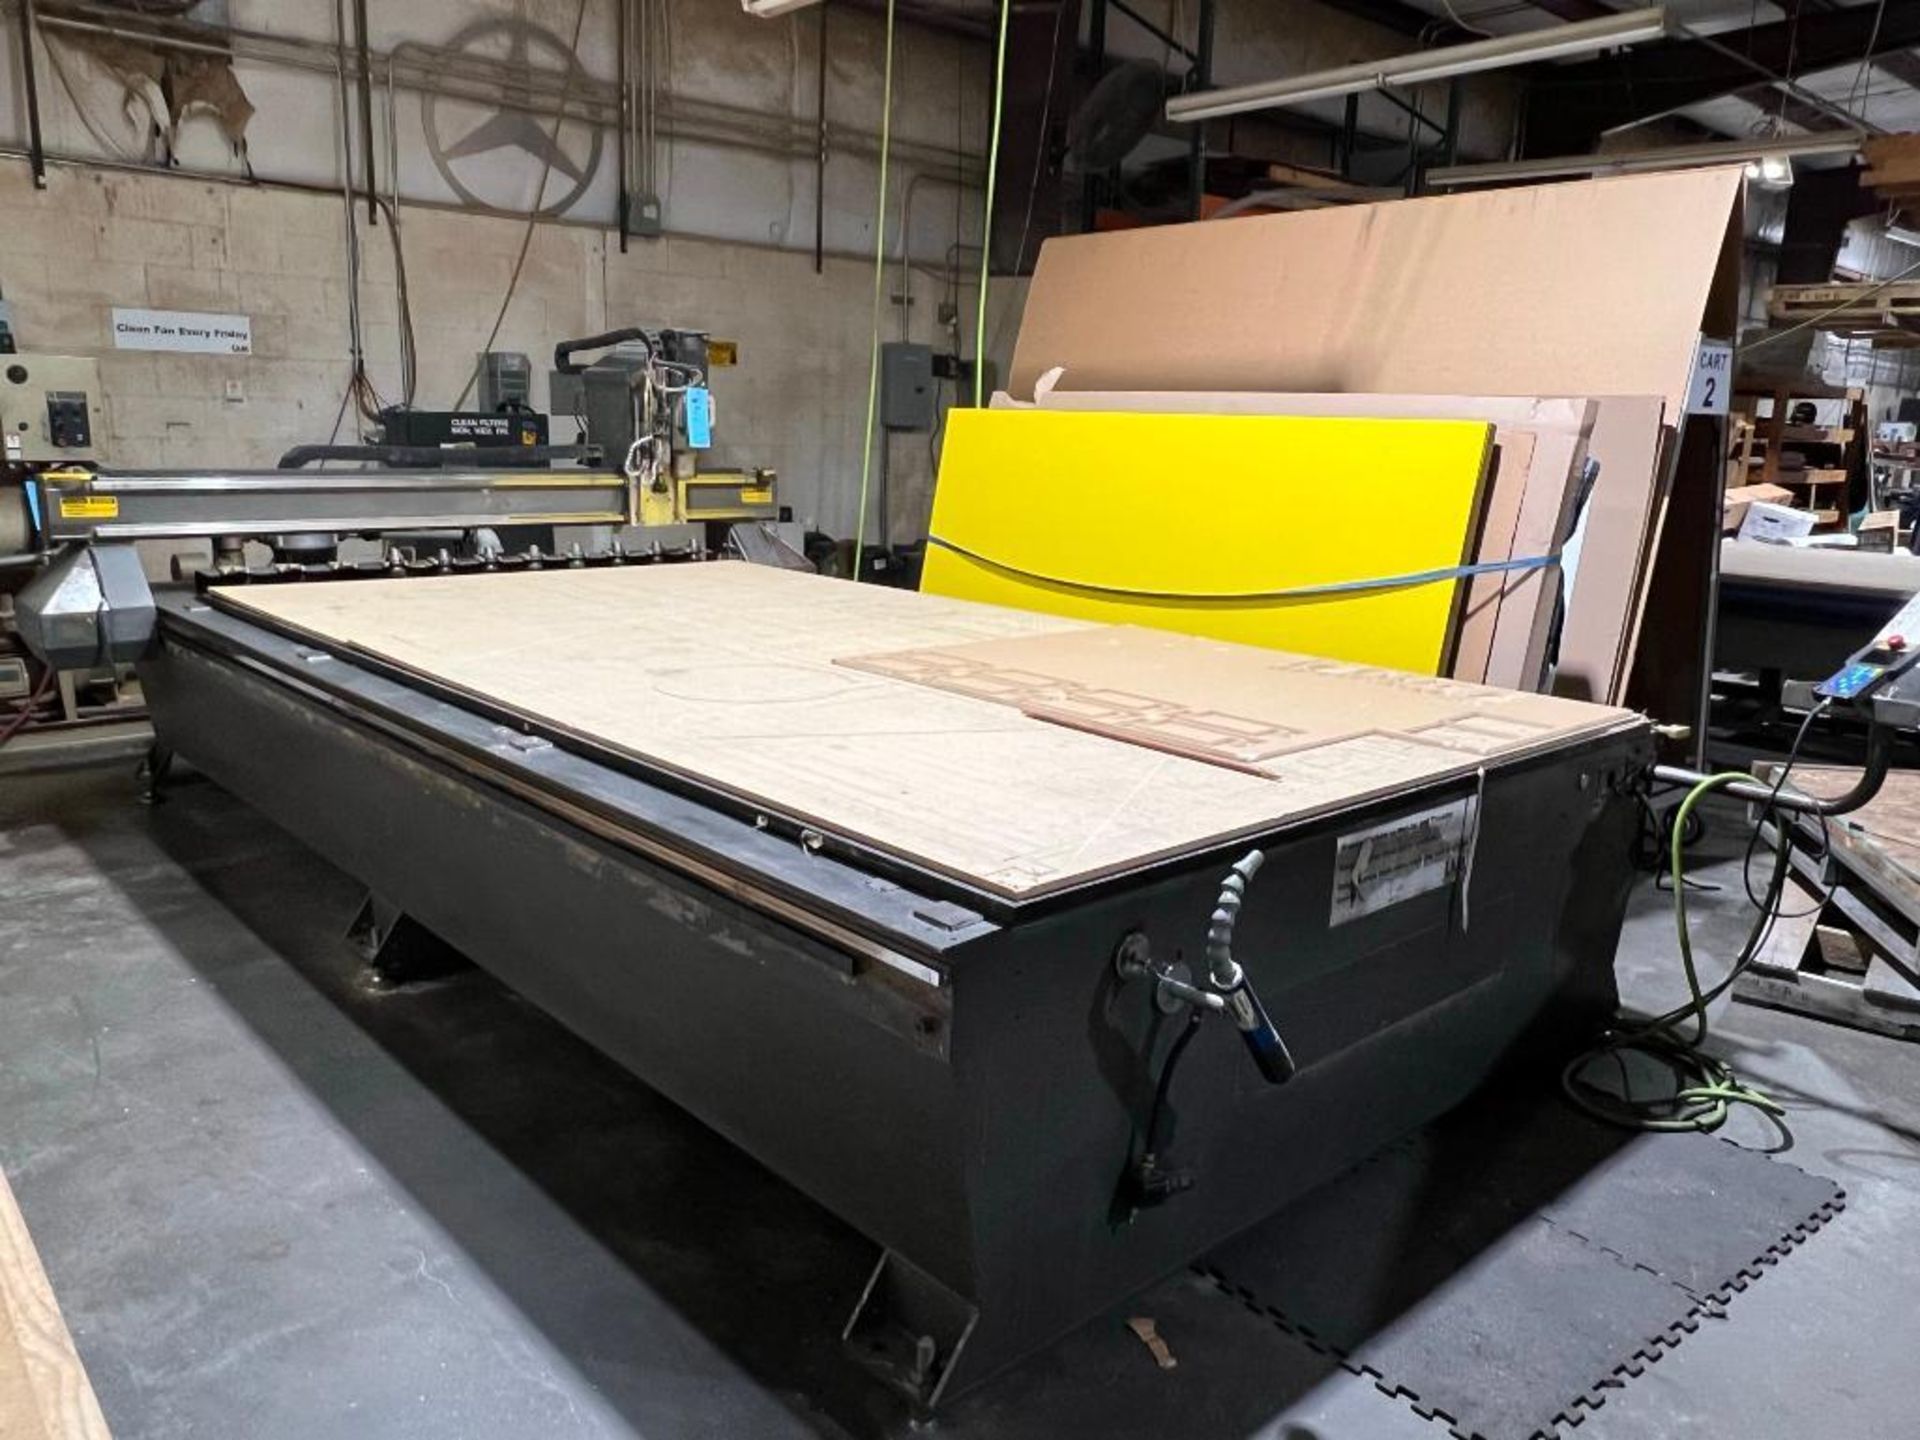 Multicam CNC Router Model 3305-R, S/N 3-305-R05361, 6' x 12' Table, with Tooling, Pendant Controls, - Image 16 of 16